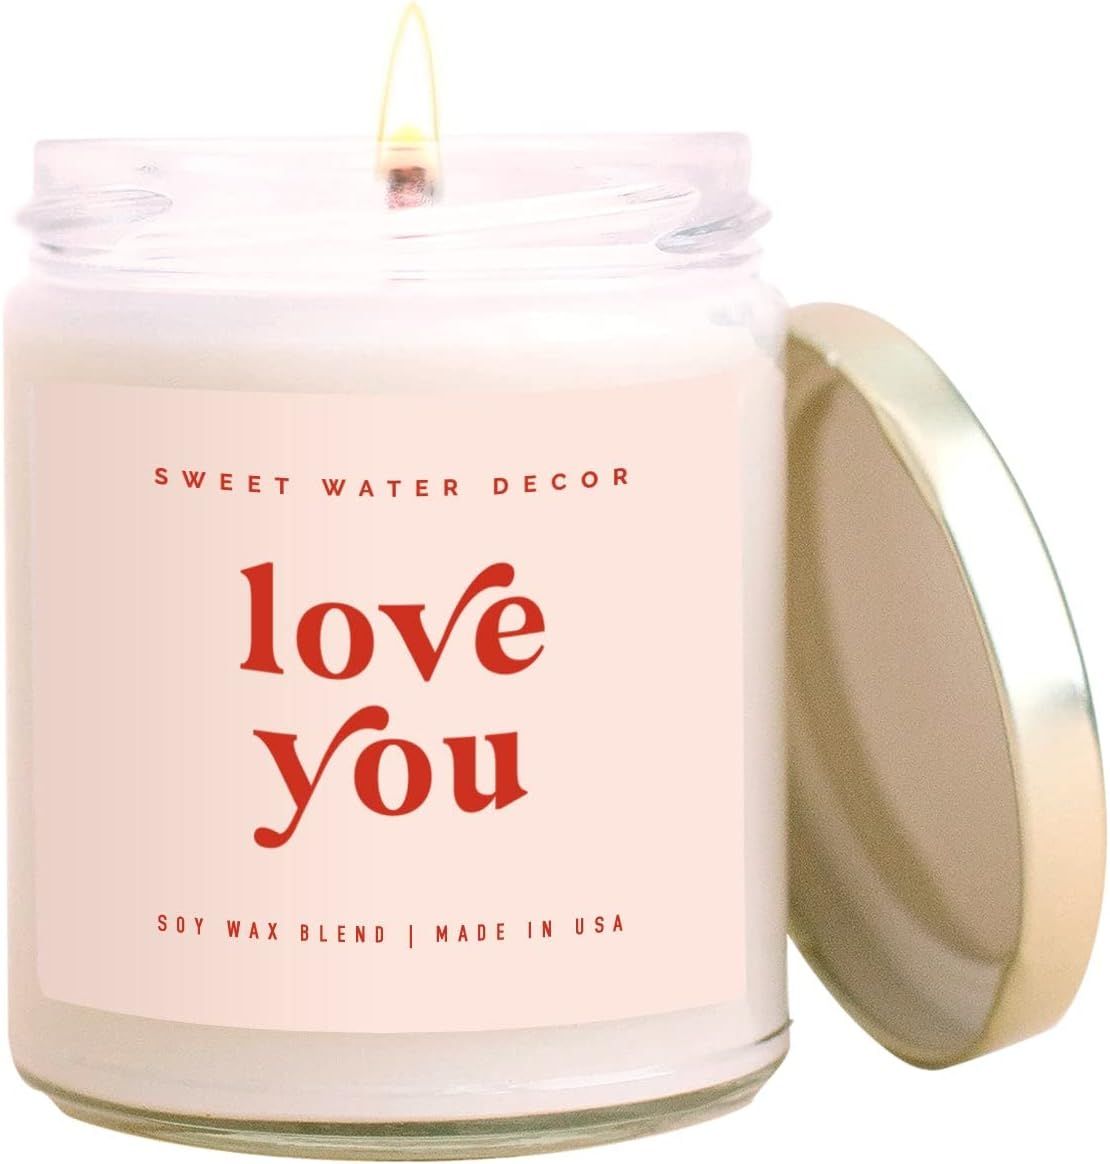 Sweet Water Decor, Love You Candle | Mahogany, Lavender, Wood, and Geramium Scented Candle | 9oz ... | Amazon (US)